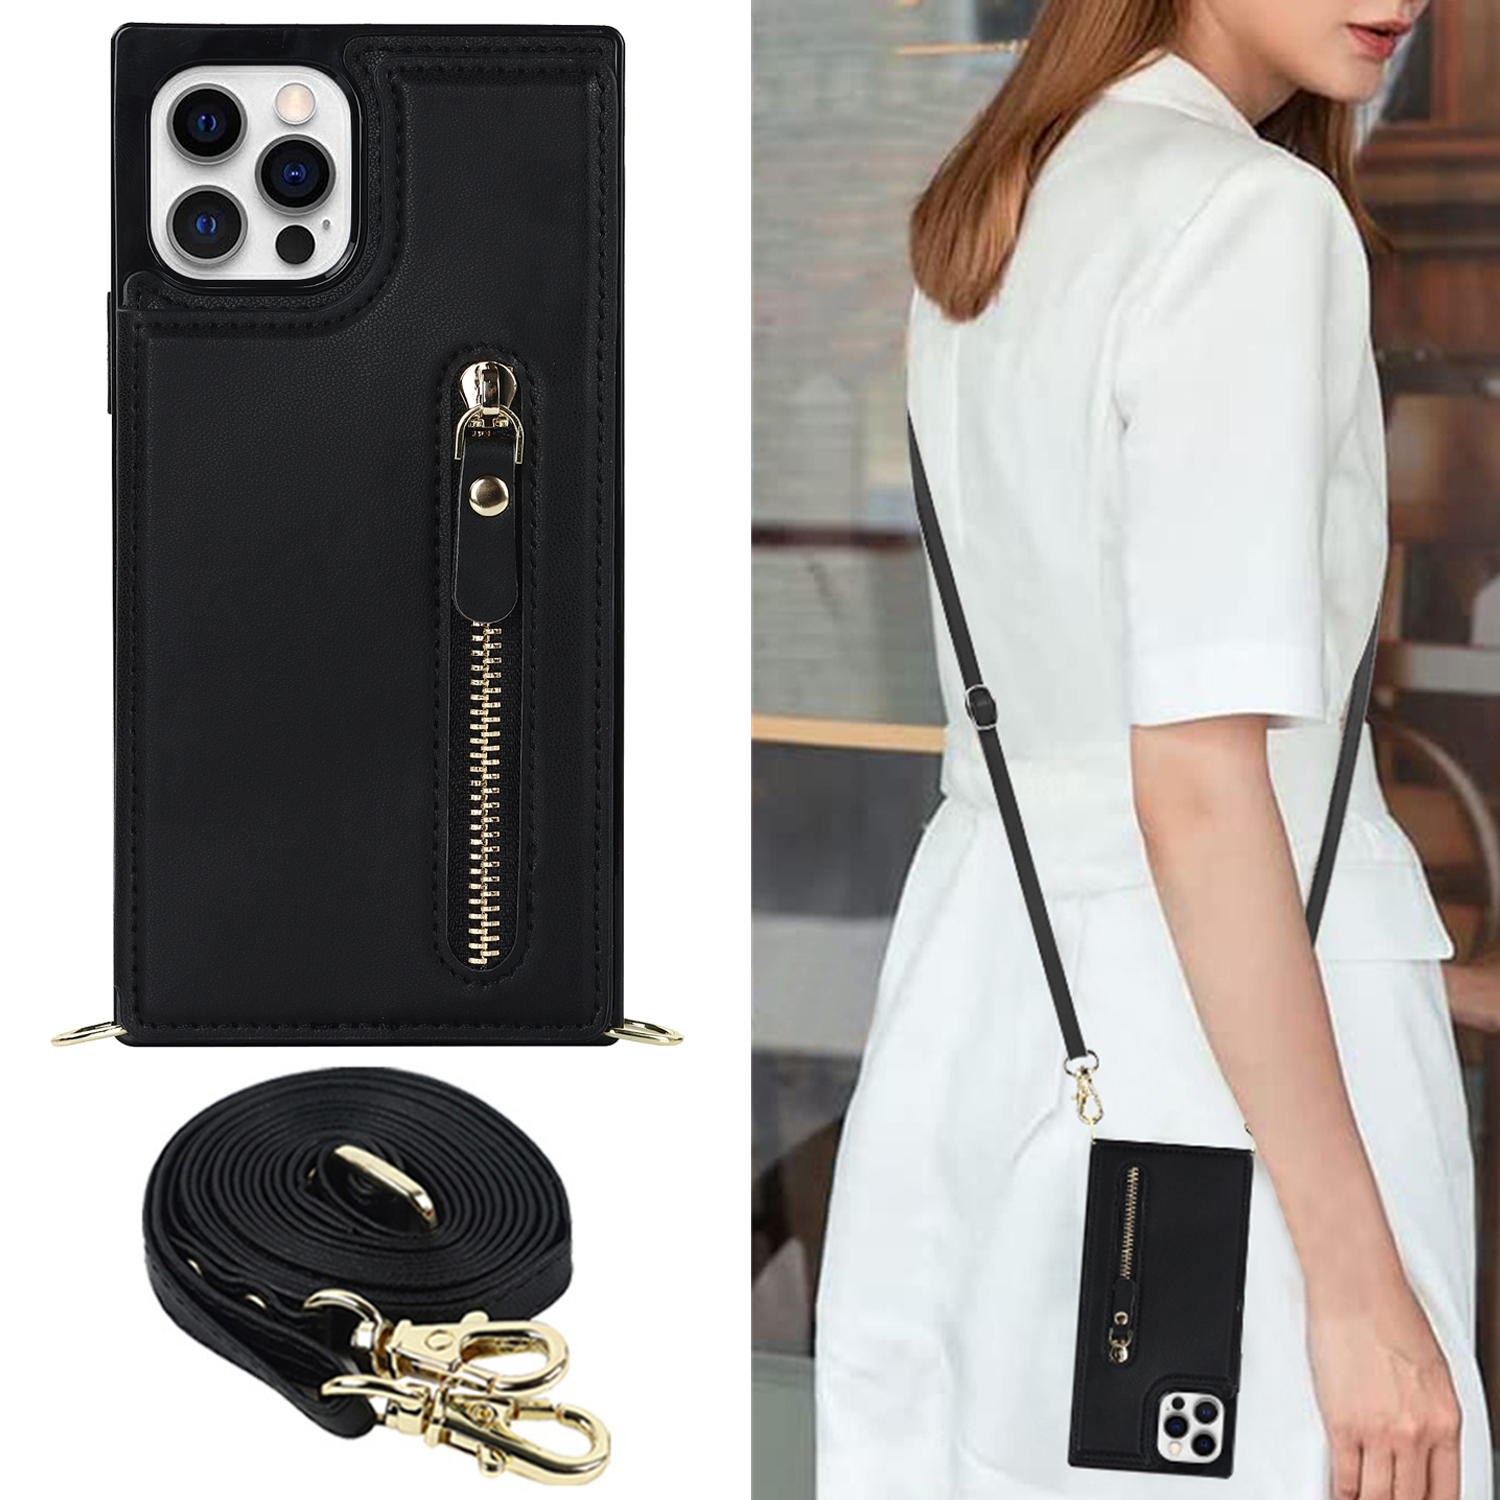 13 Best phone bags 2023: Crossbody mobile phone holders are